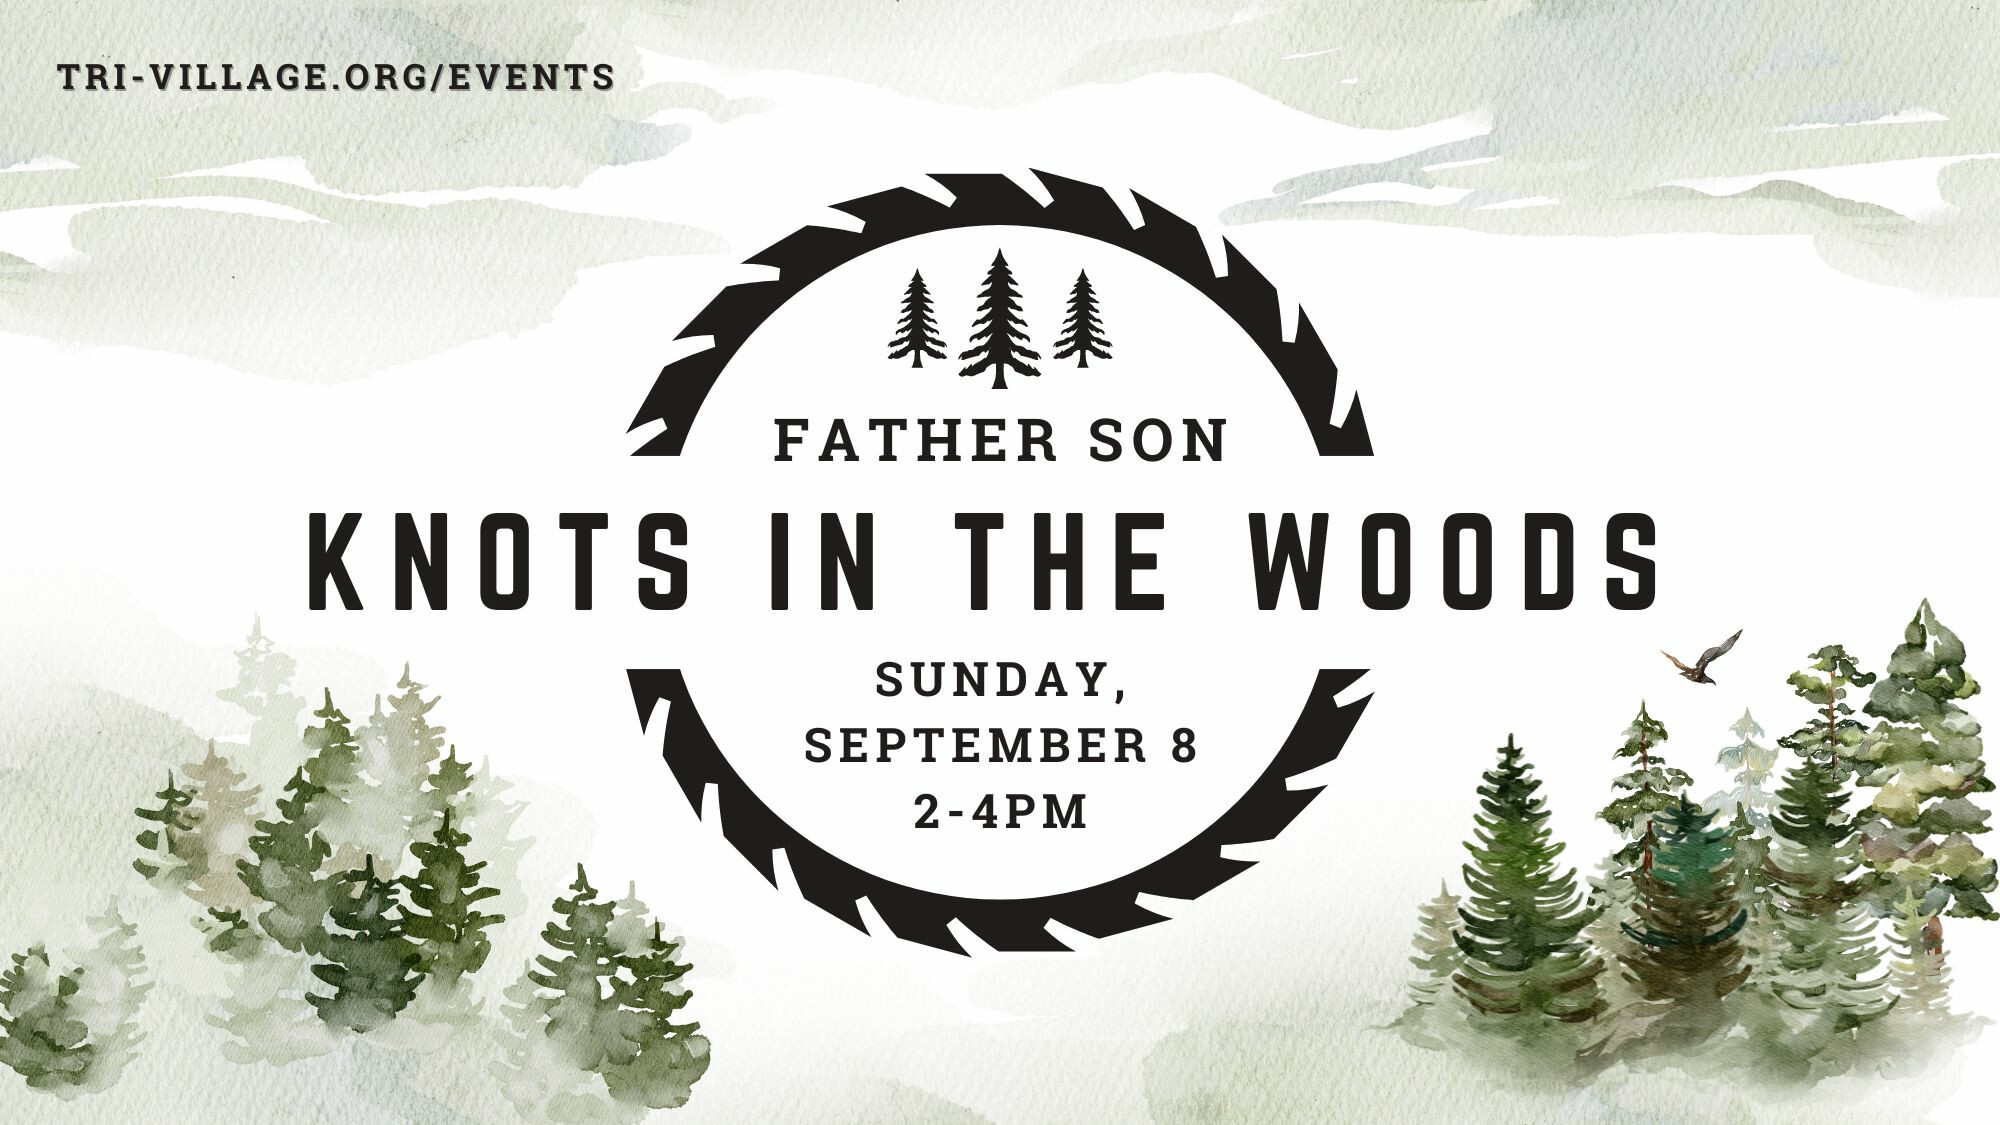 Father Son Knots in the Woods